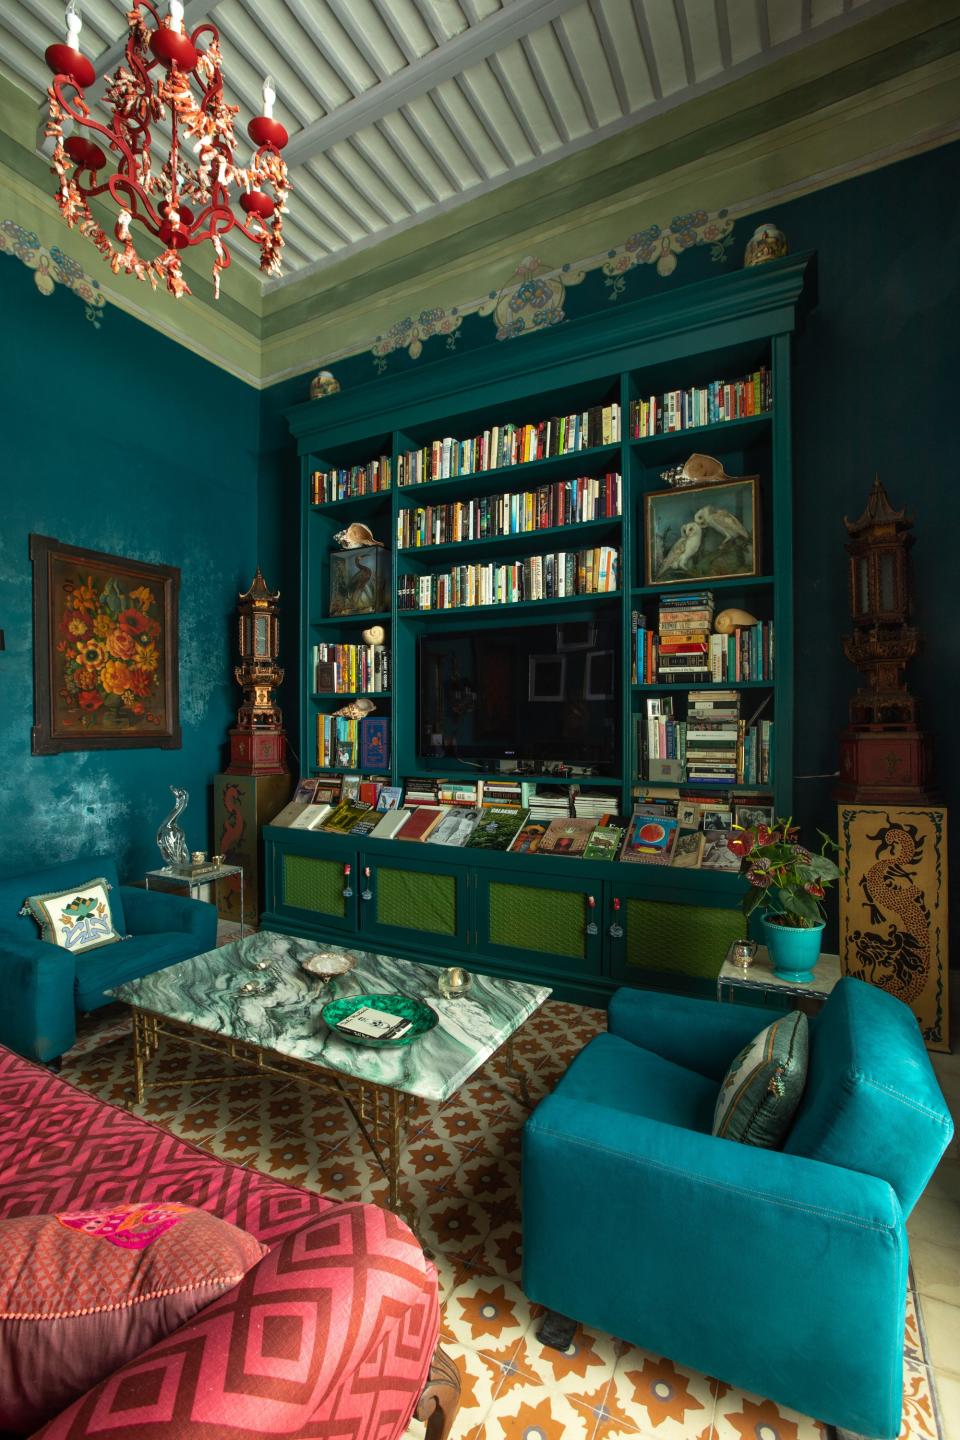 The biblioteca’s original wall stencils and beamed ceiling were restored, and Skouras filled the room with one of her coral light fixtures, a custom cocktail table she designed with a granite top, and chairs from Cassina that once belonged to her parents. The sofa fabric is a David Hicks linen.